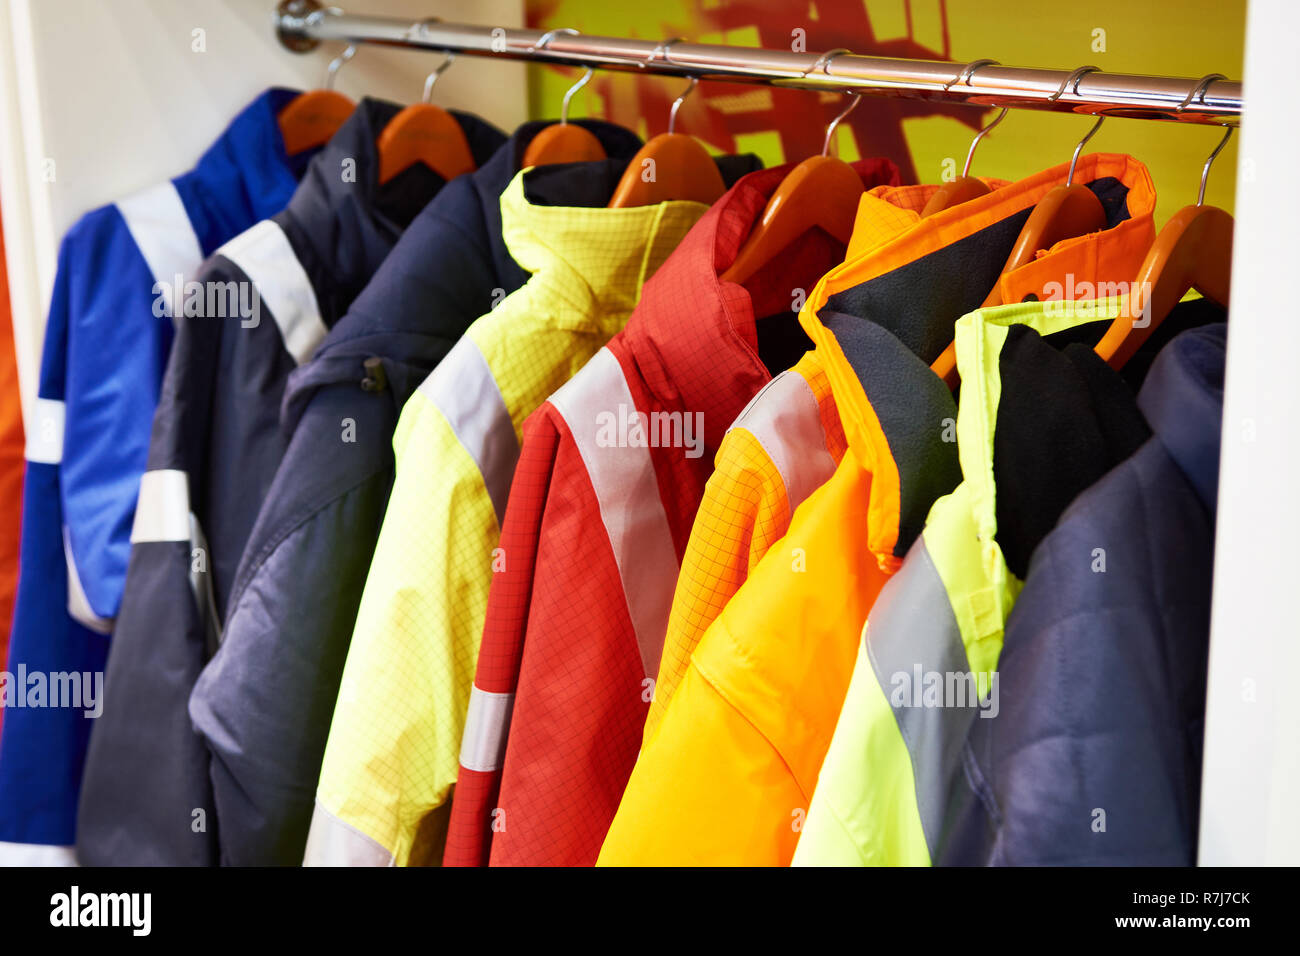 Jackets for workwear for builders and manufacturers Stock Photo